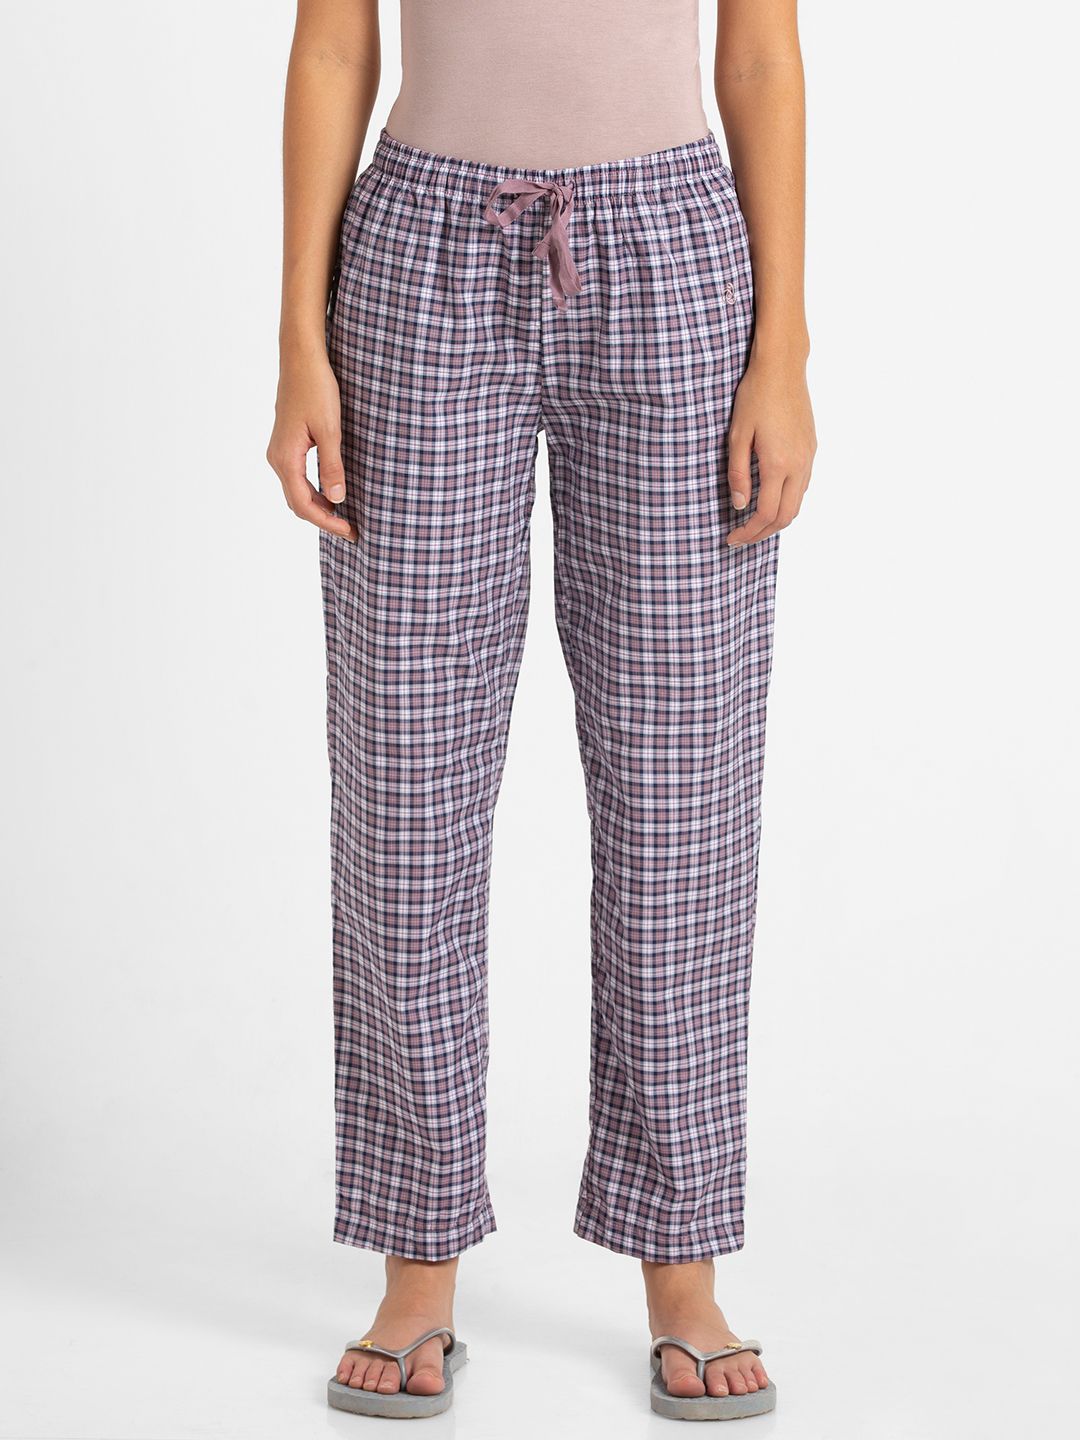 Jockey Women Assorted Relaxed Fit Lounge Pants Price in India